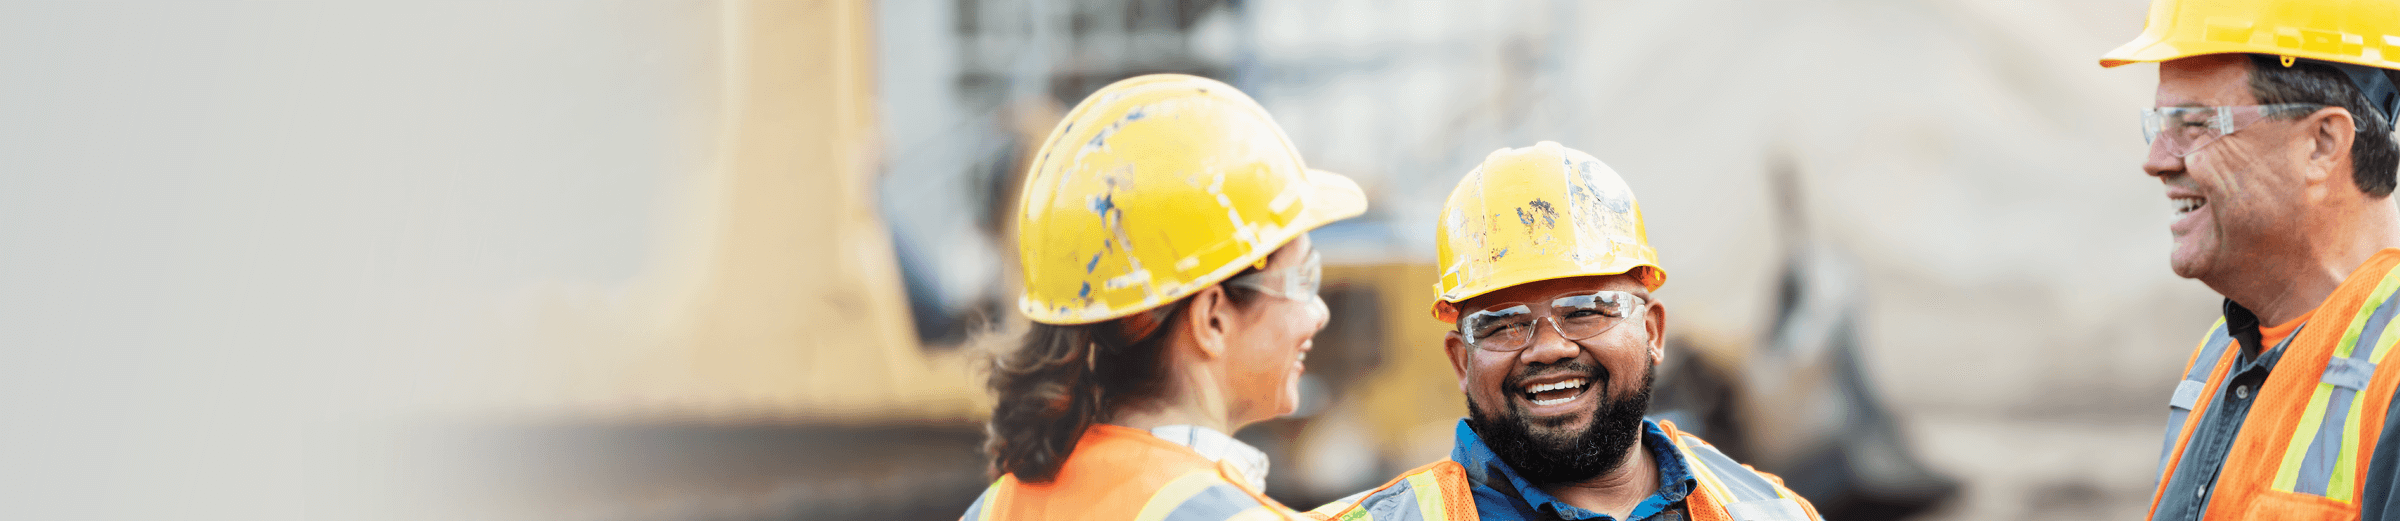 Three construction workers wearing yellow hardhats and orange vests talk to eachother on a job site.